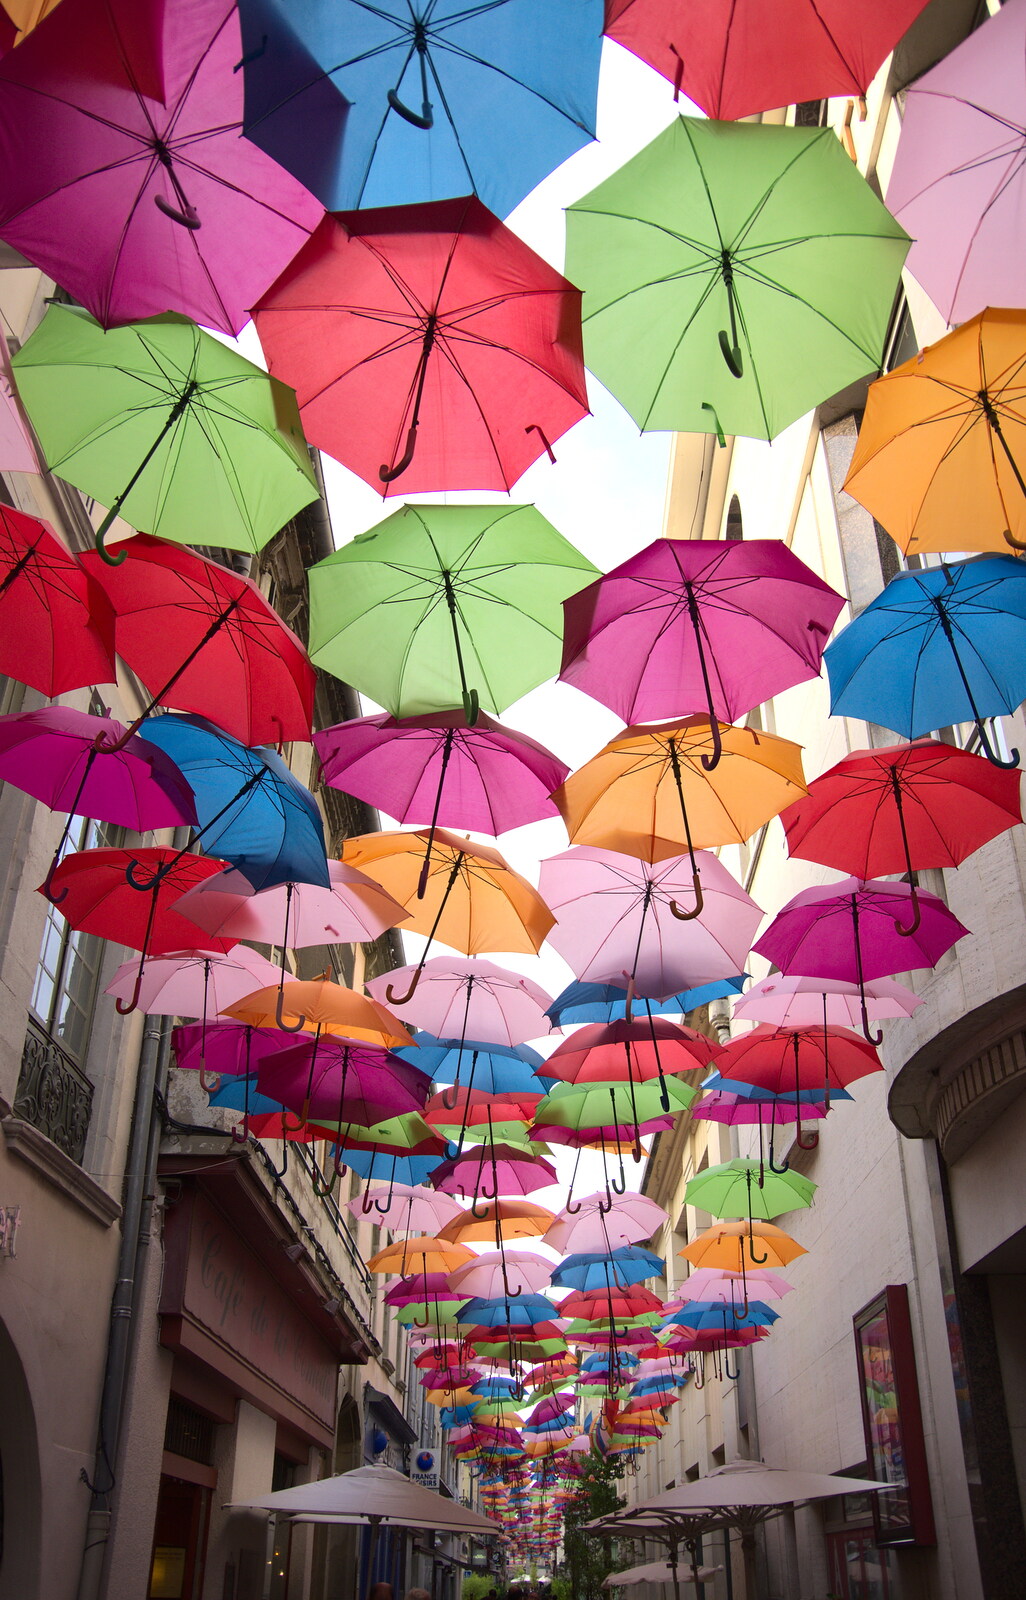 Umbrellas over the street from A Trip to Carcassonne, Aude, France - 8th August 2018